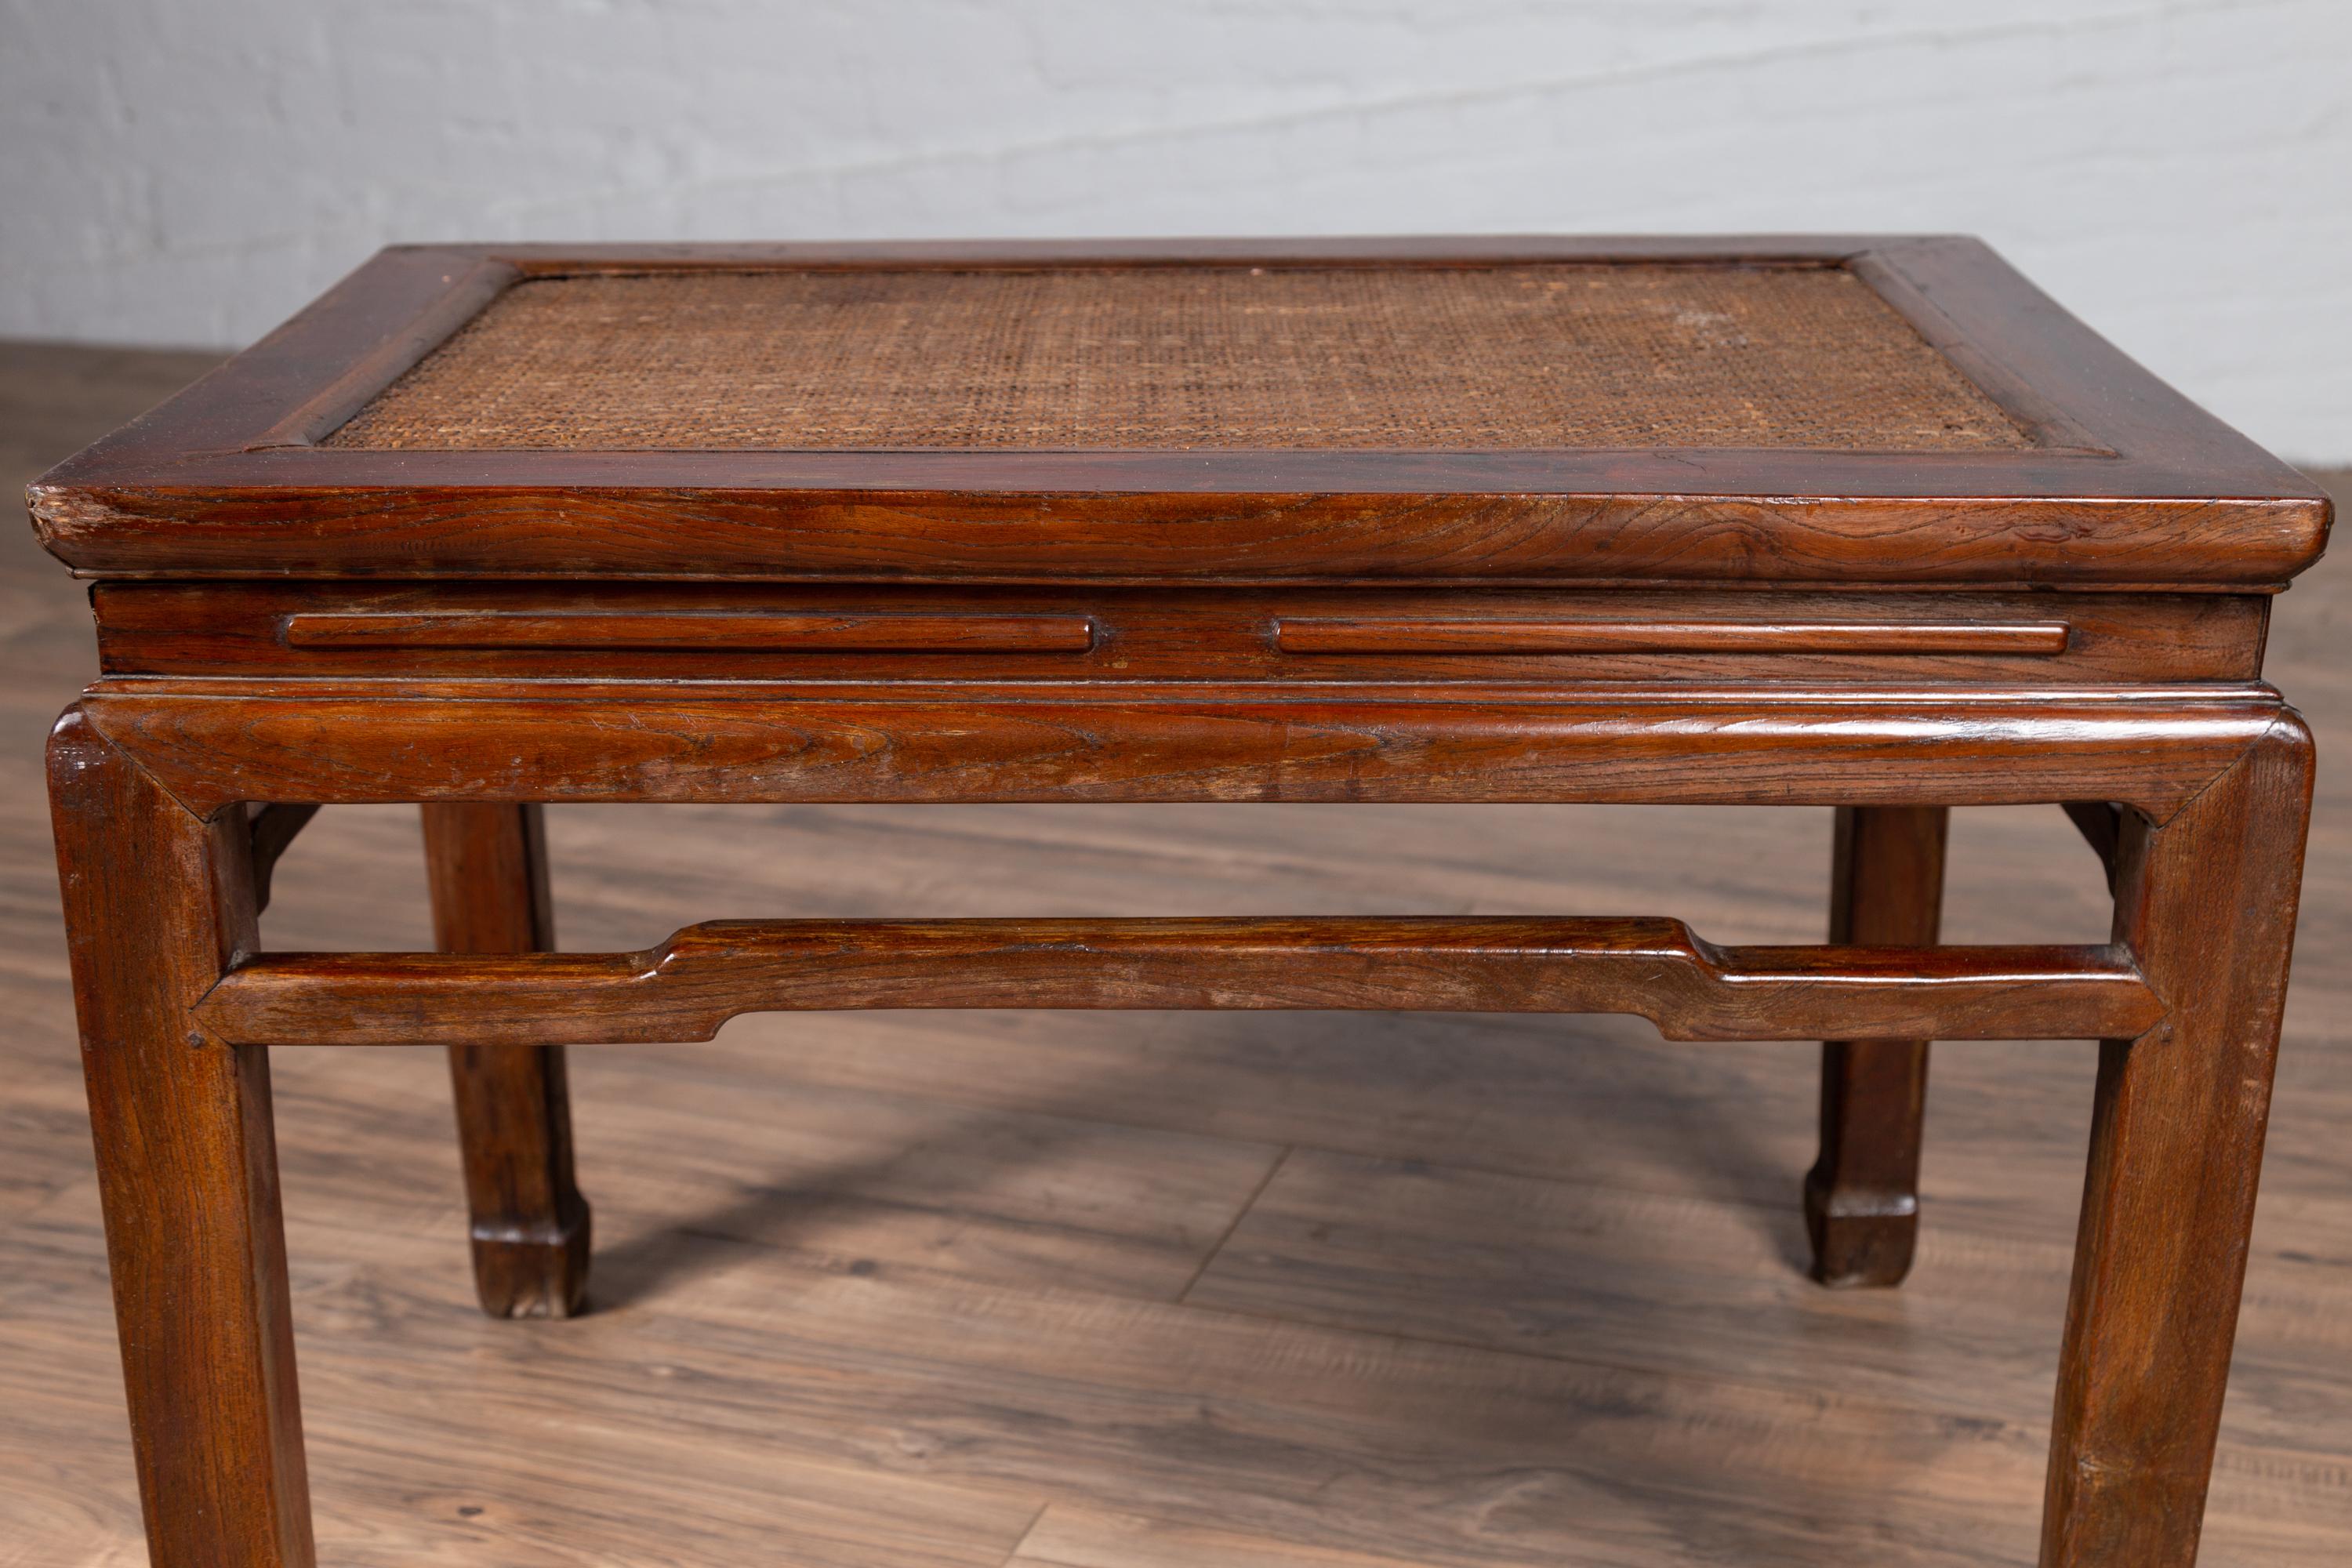 Antique Chinese Ming Dynasty Style Waisted Side Table with Woven Rattan Top For Sale 4